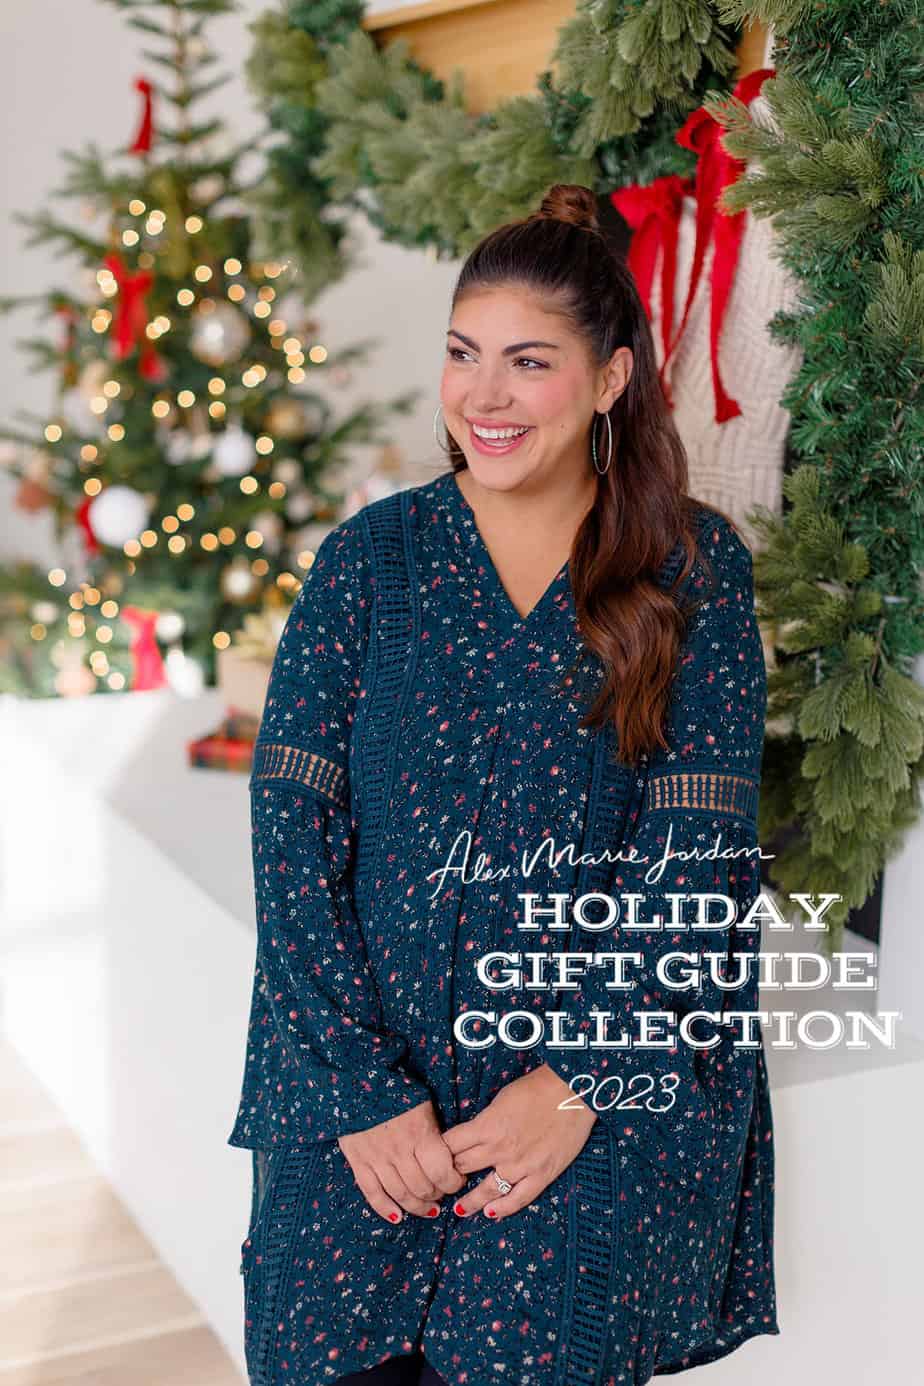 Complete Holiday Gift Guide Collection for 2023 – Something for Everyone